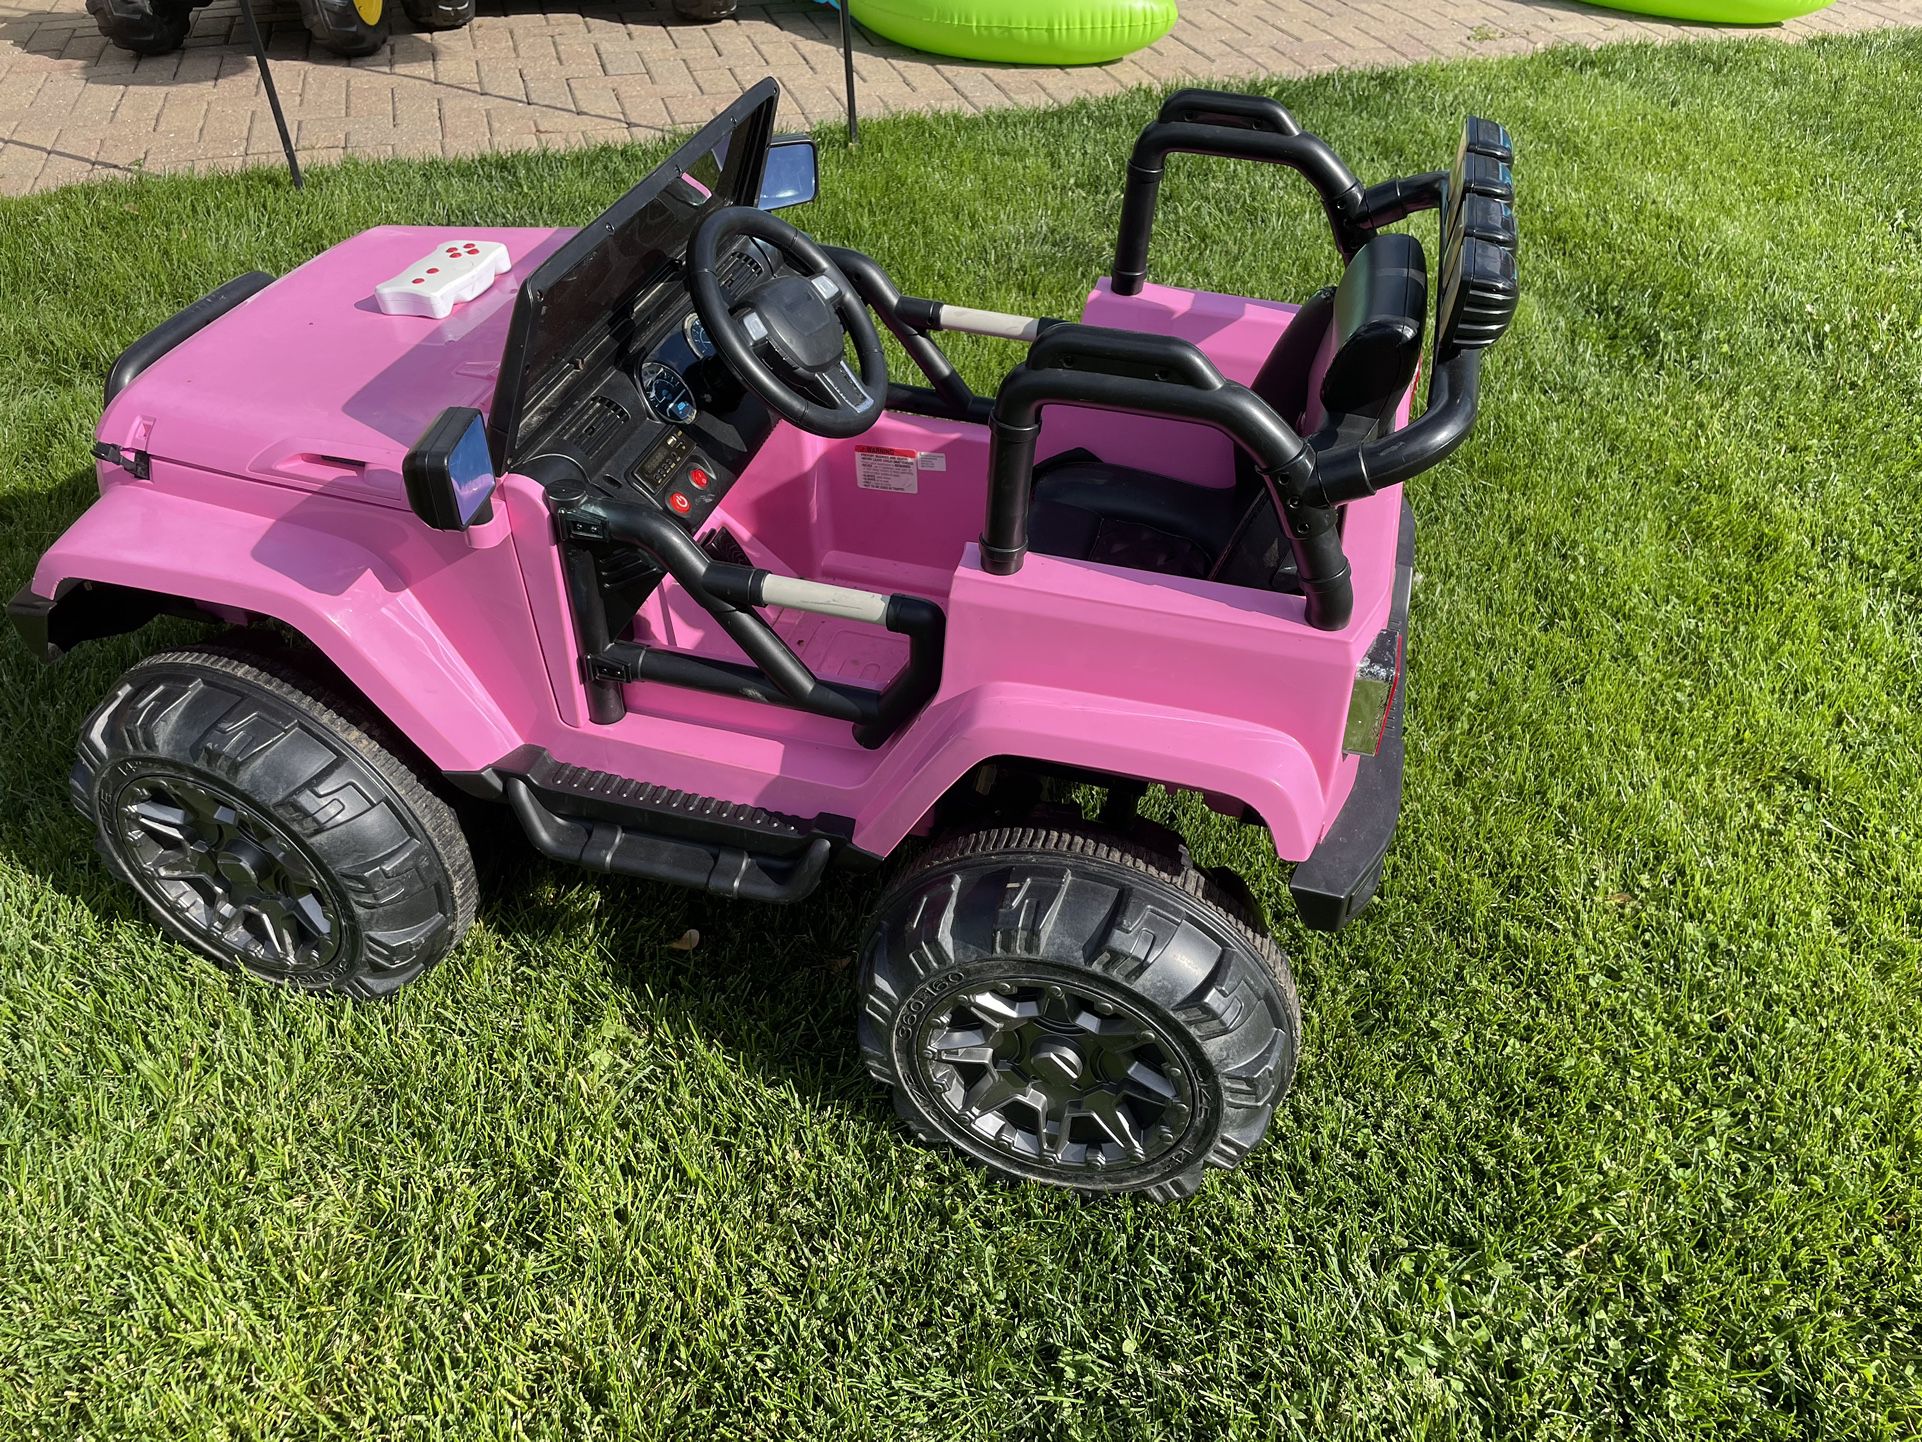 Jeep for kids